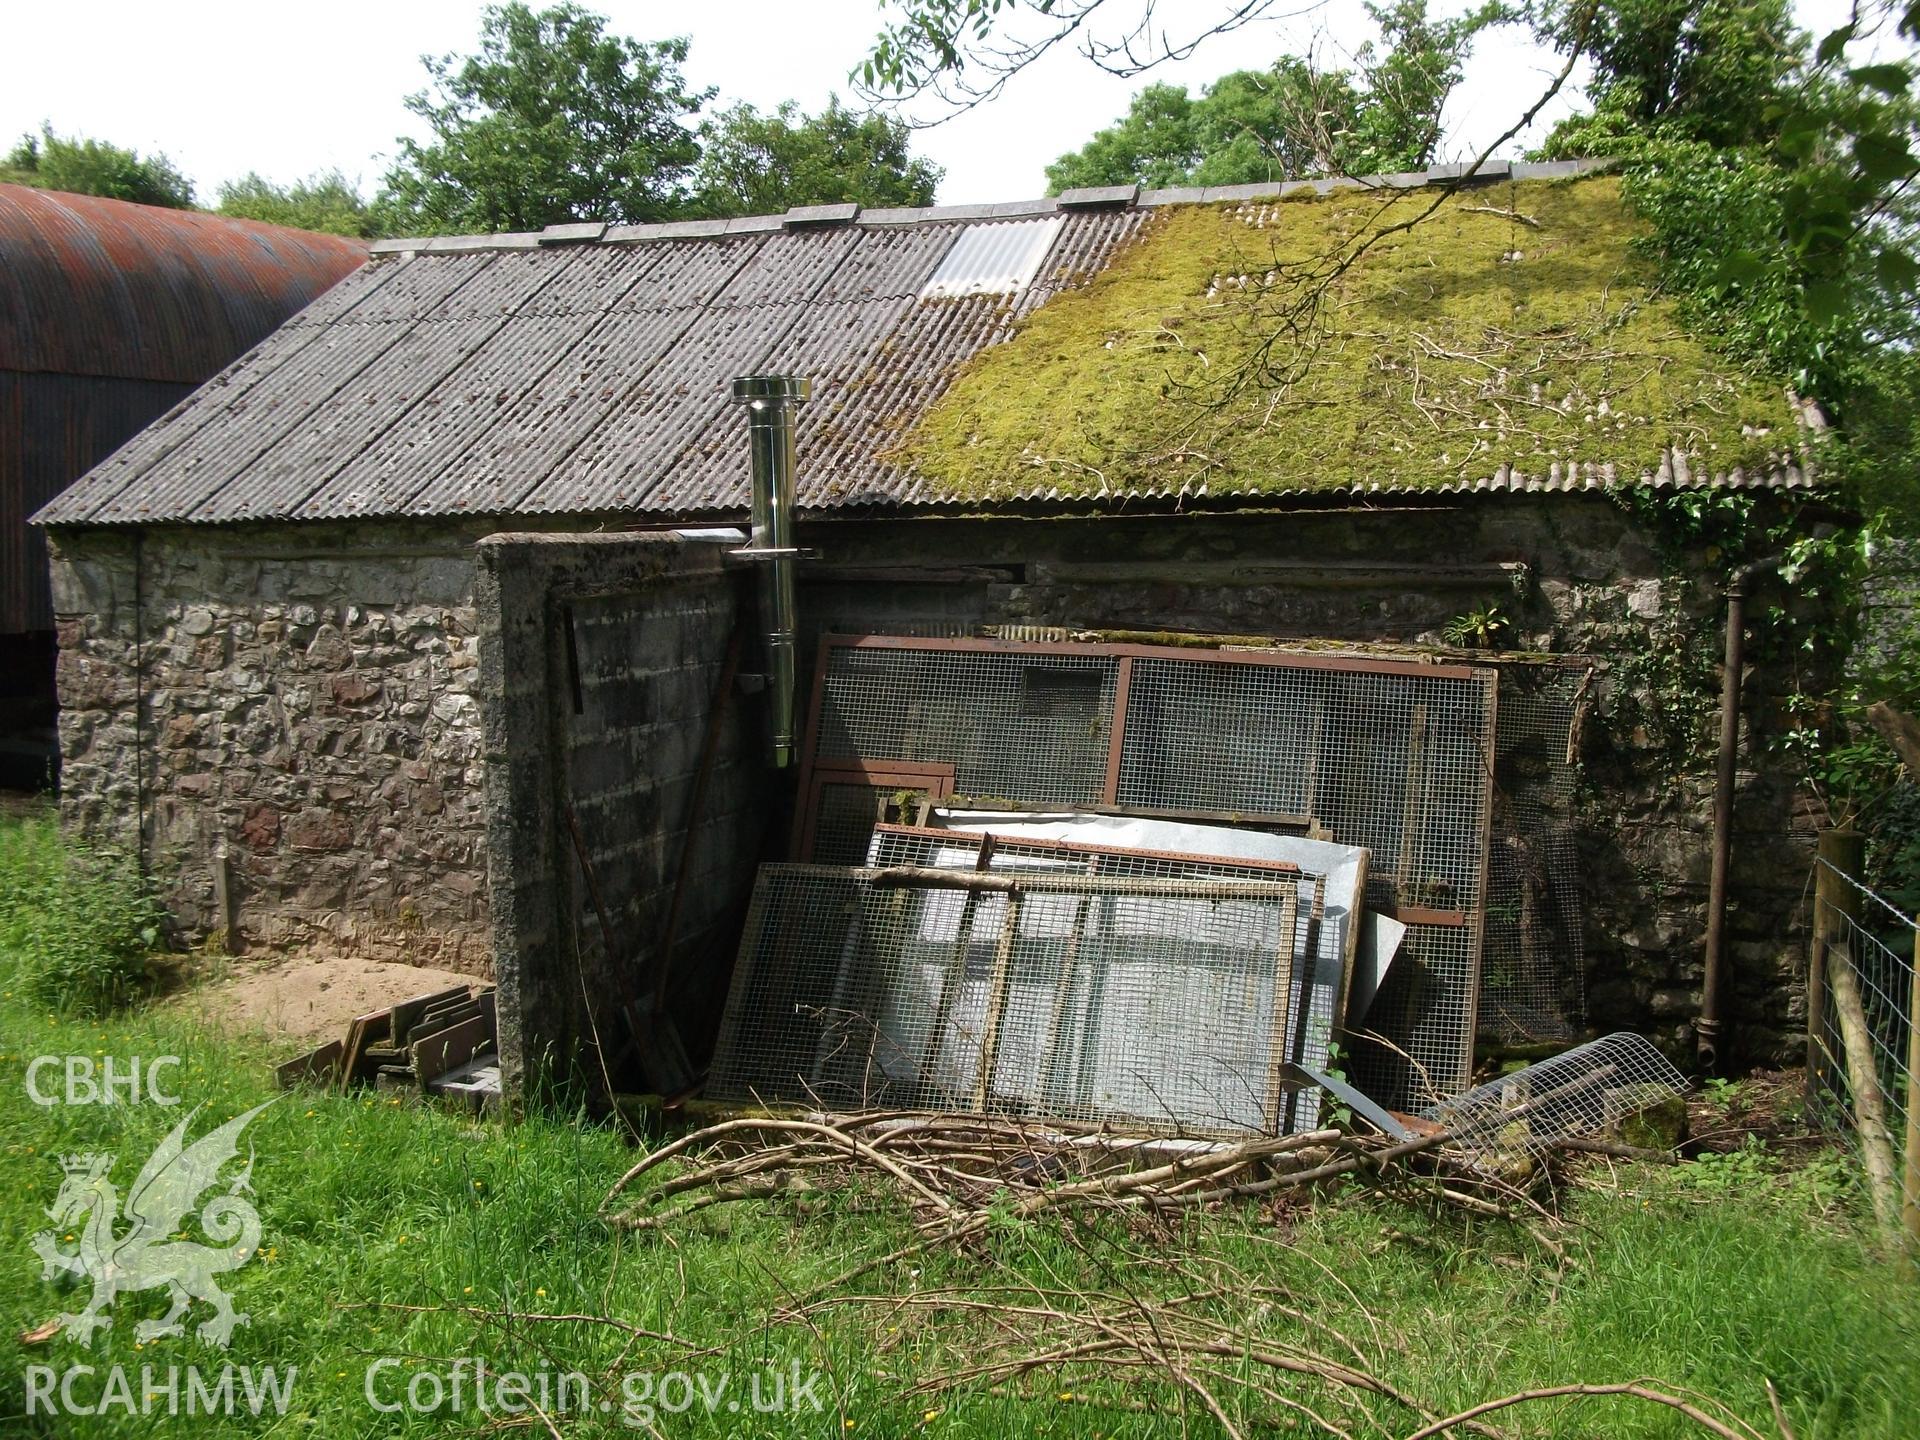 Photograph showing exterior rear elevation of 'ale and pail barn,' at Pant-y-Castell, Maesybont, Photographed by Mark Waghorn to meet a condition attached to planning application.